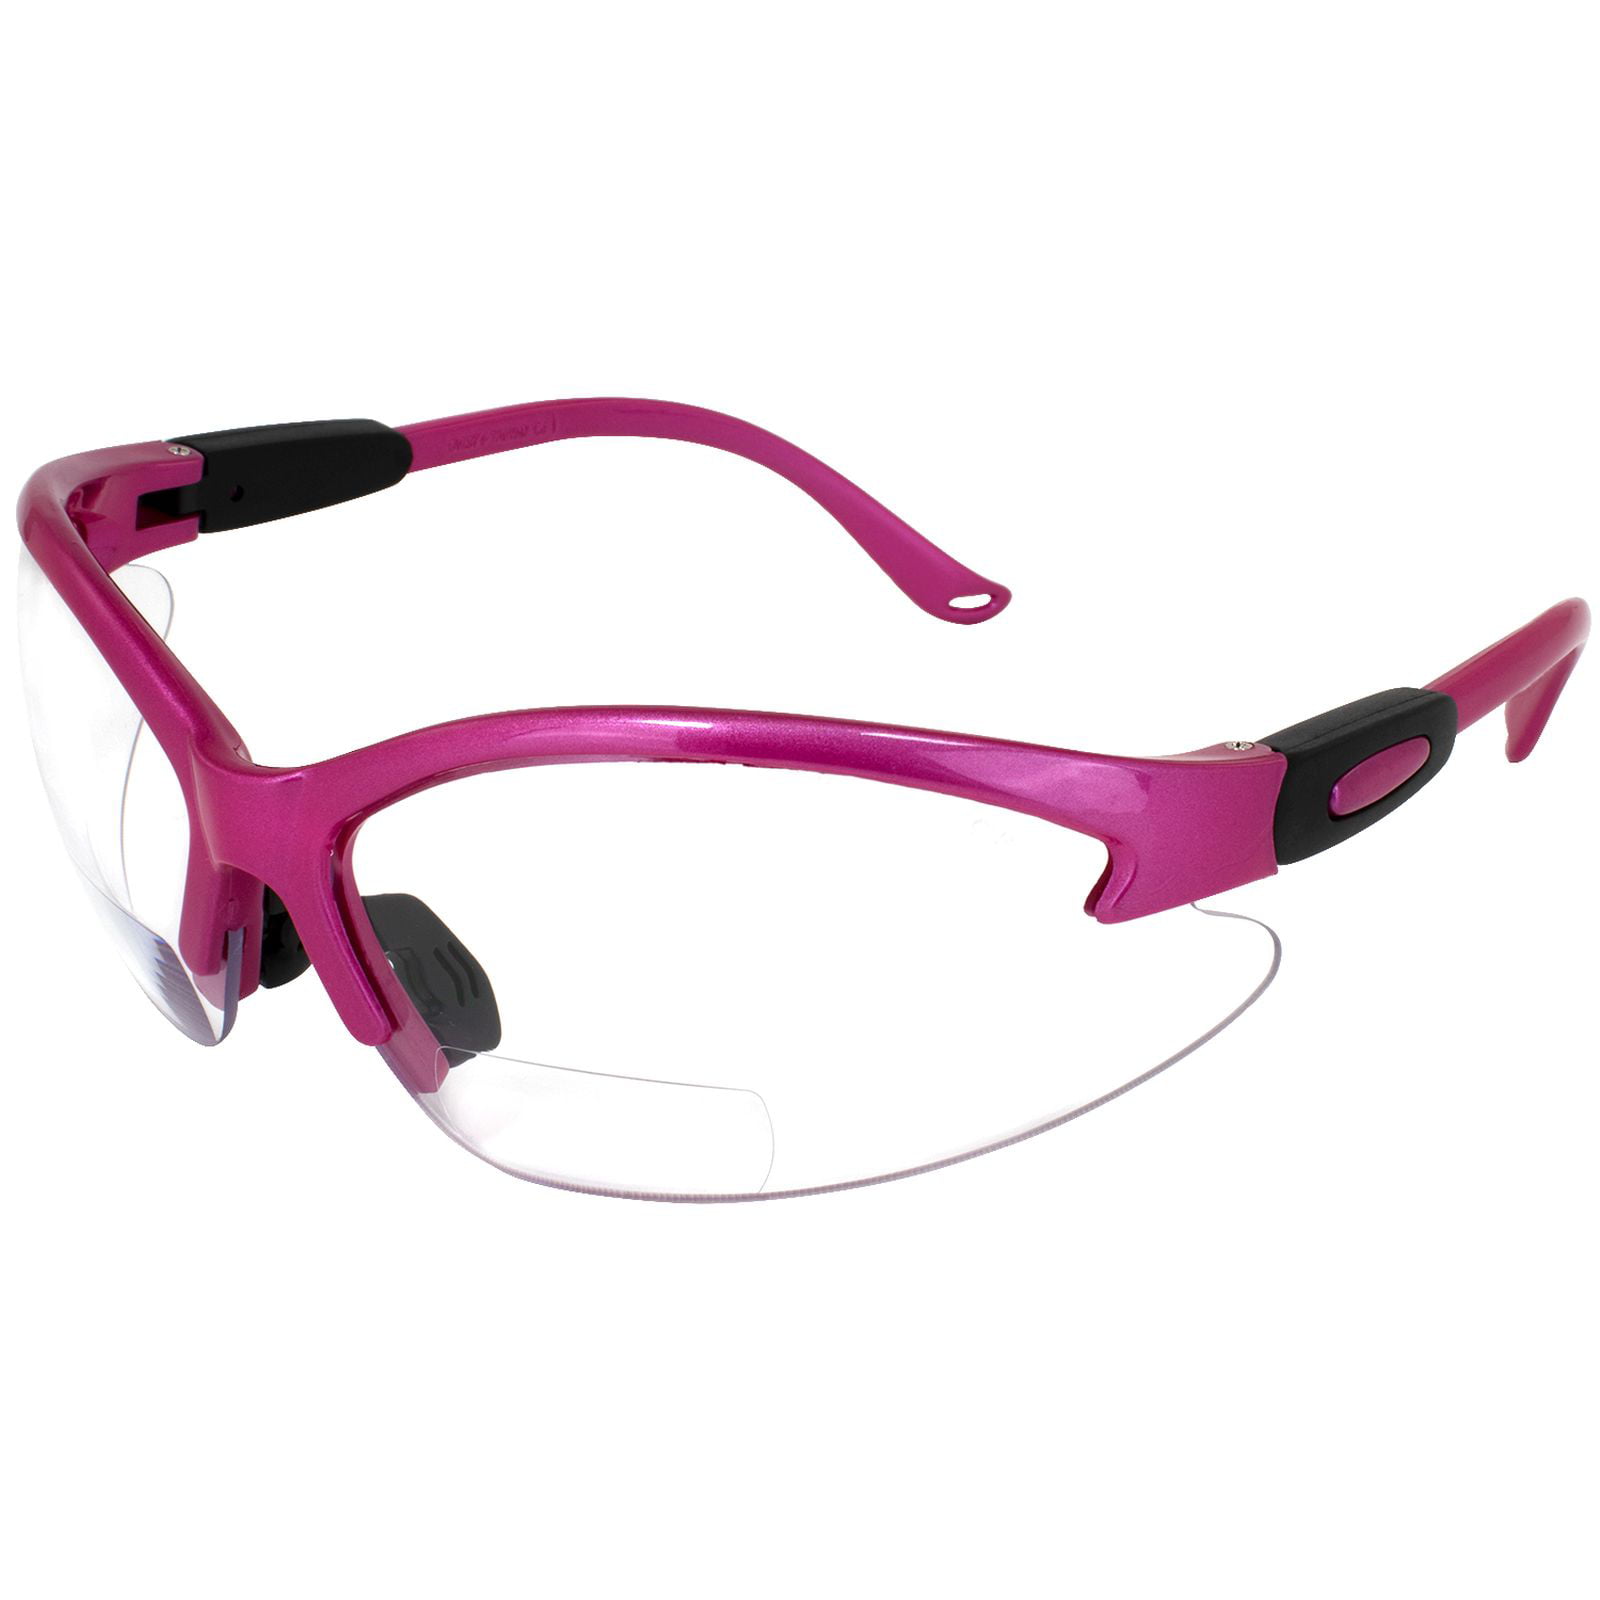 Lady Eva Bifocal Safety Glasses 2.75 Clear Lens with Pink Temples 